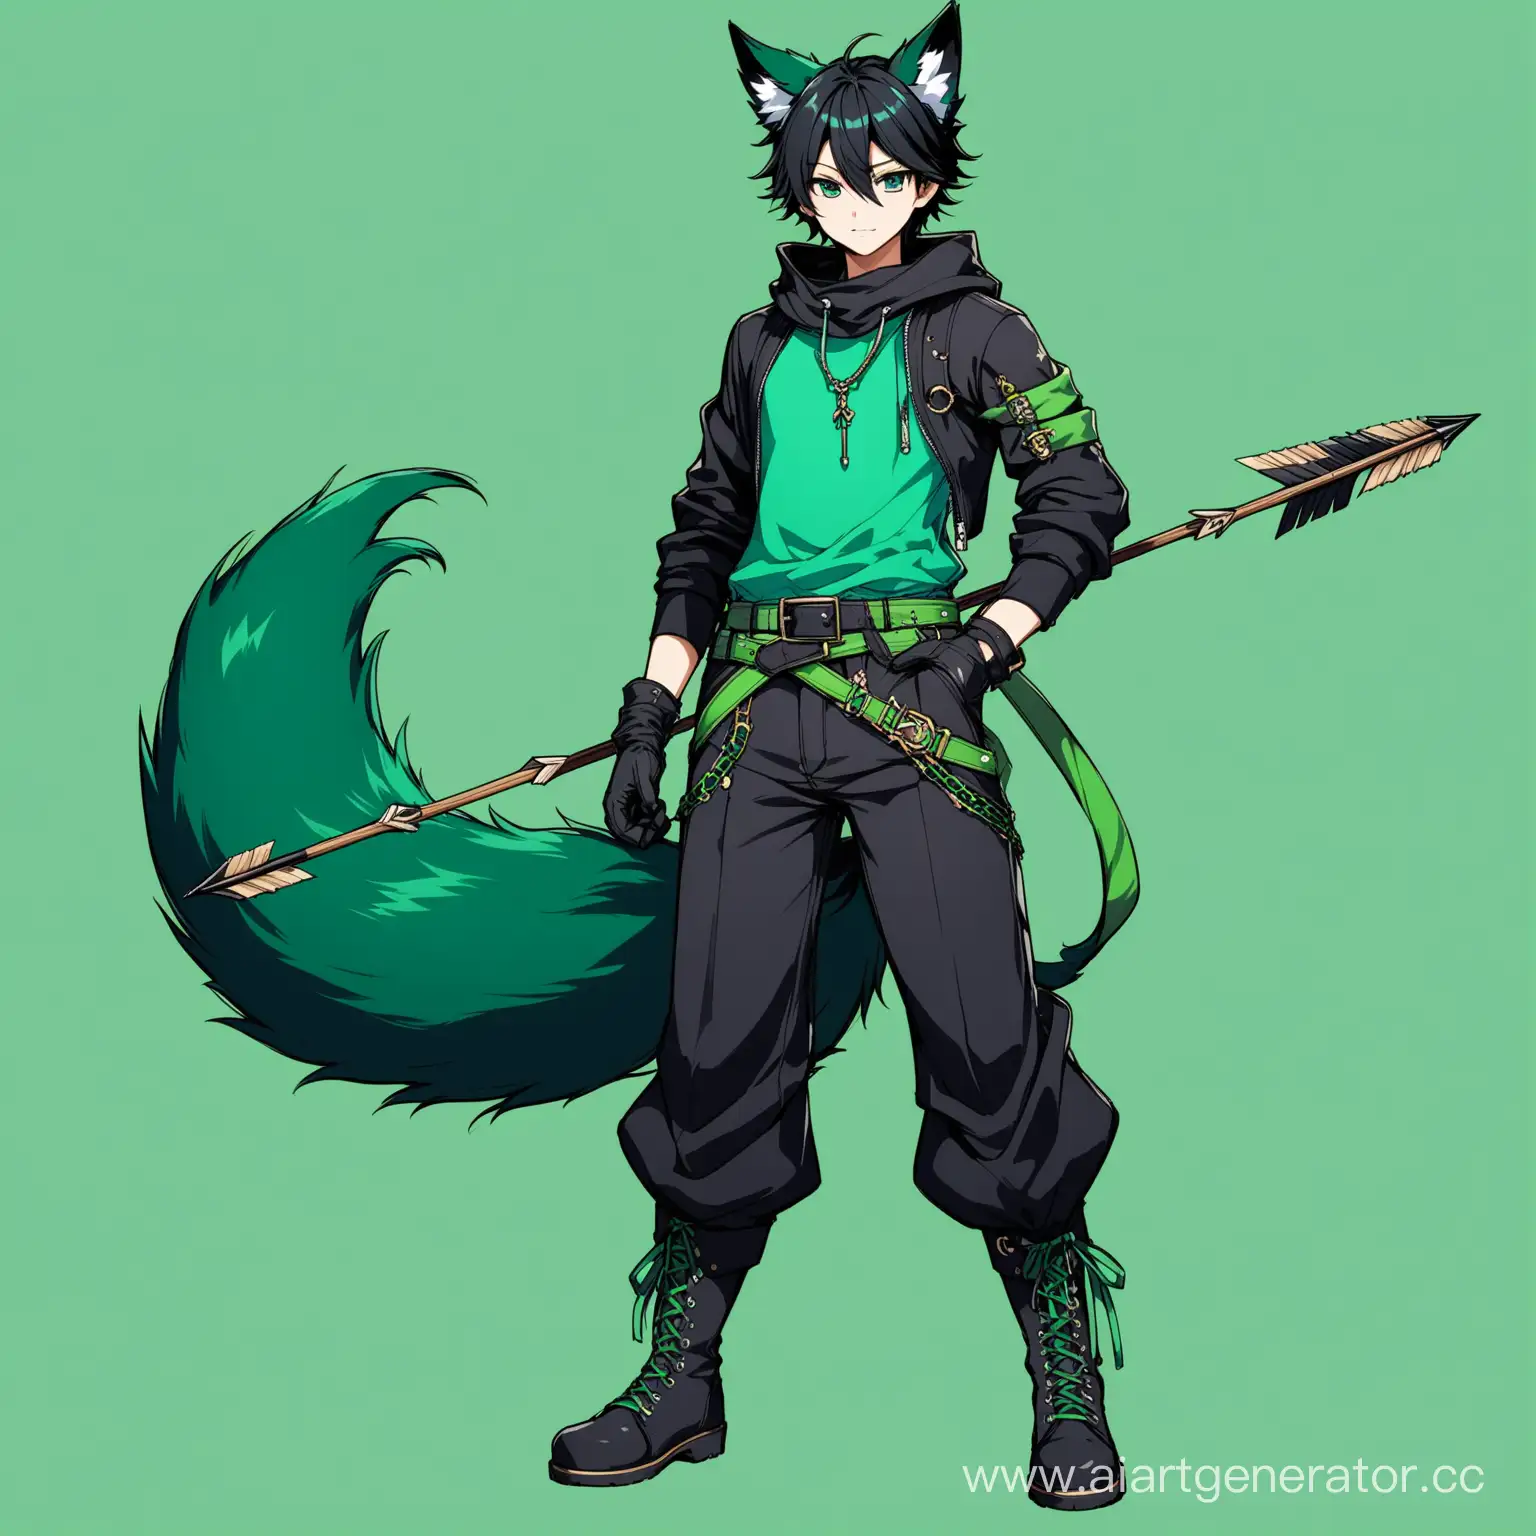 Stylish-Young-Fox-Hybrid-Archer-in-Black-and-Green-Attire-with-Bow-and-Arrows